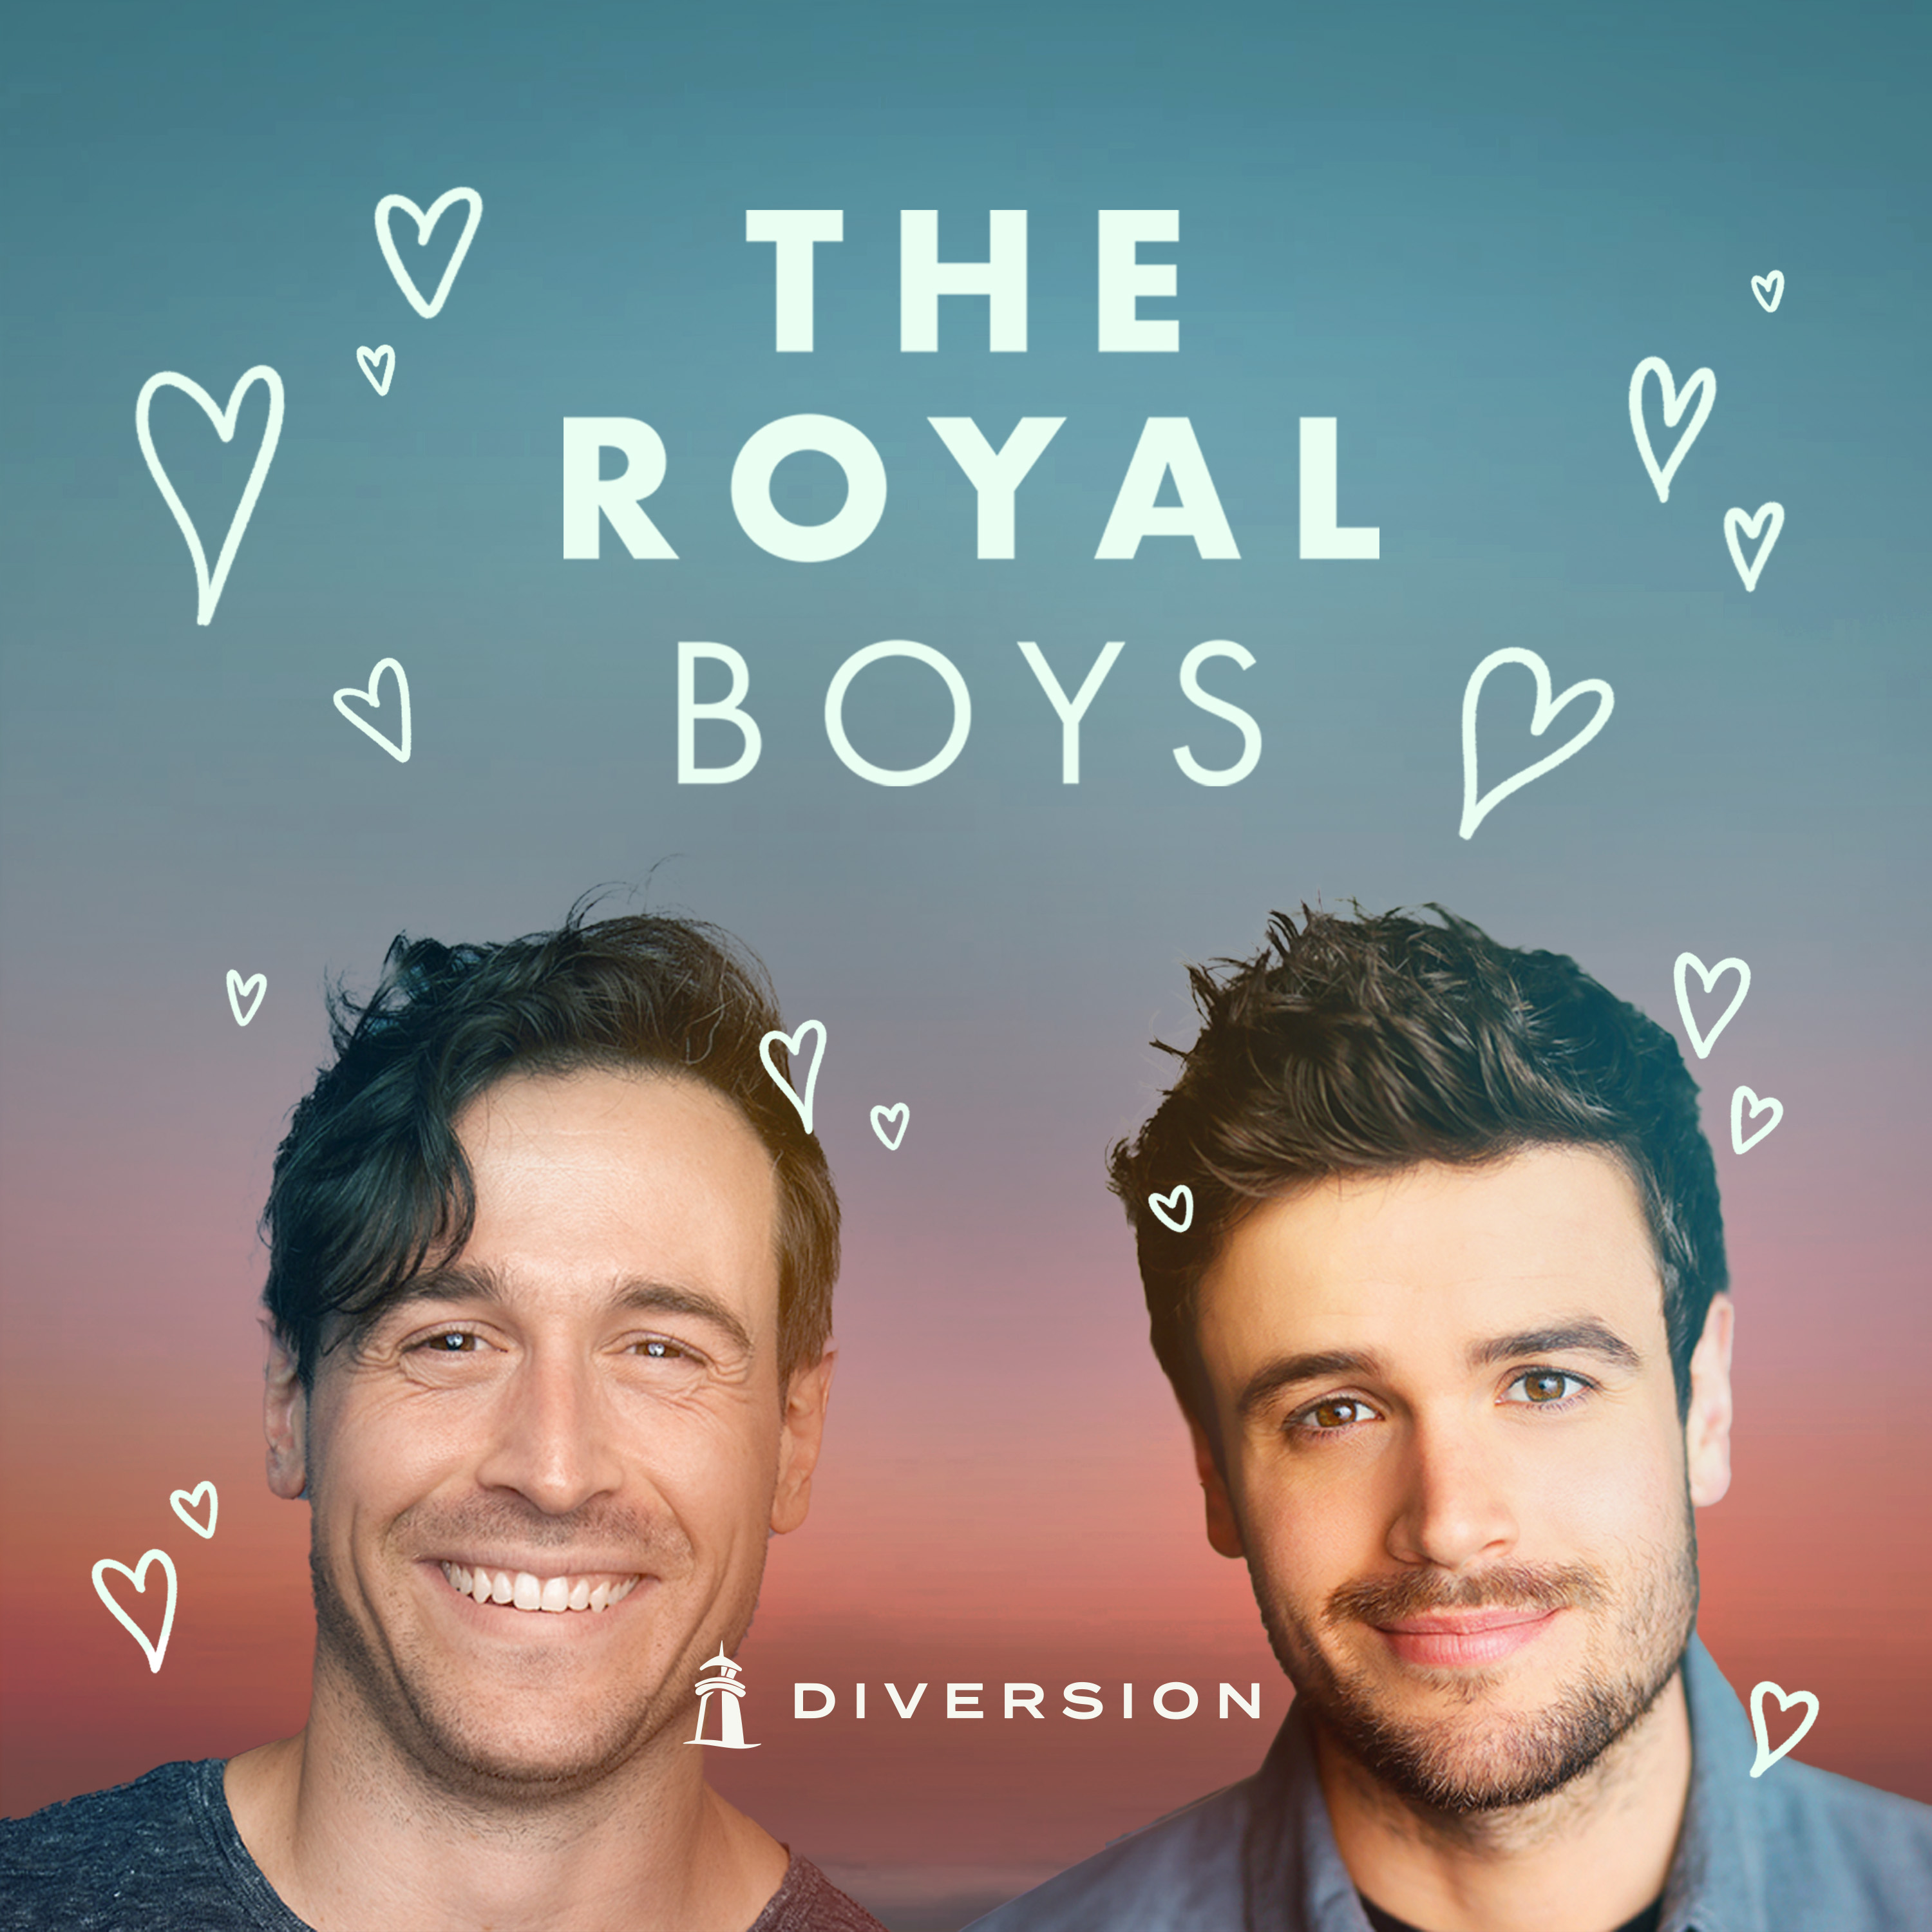 THE ROYAL BOYS E10 - Love Triangles and Ethical Clout Chasing w/ Connor Wood